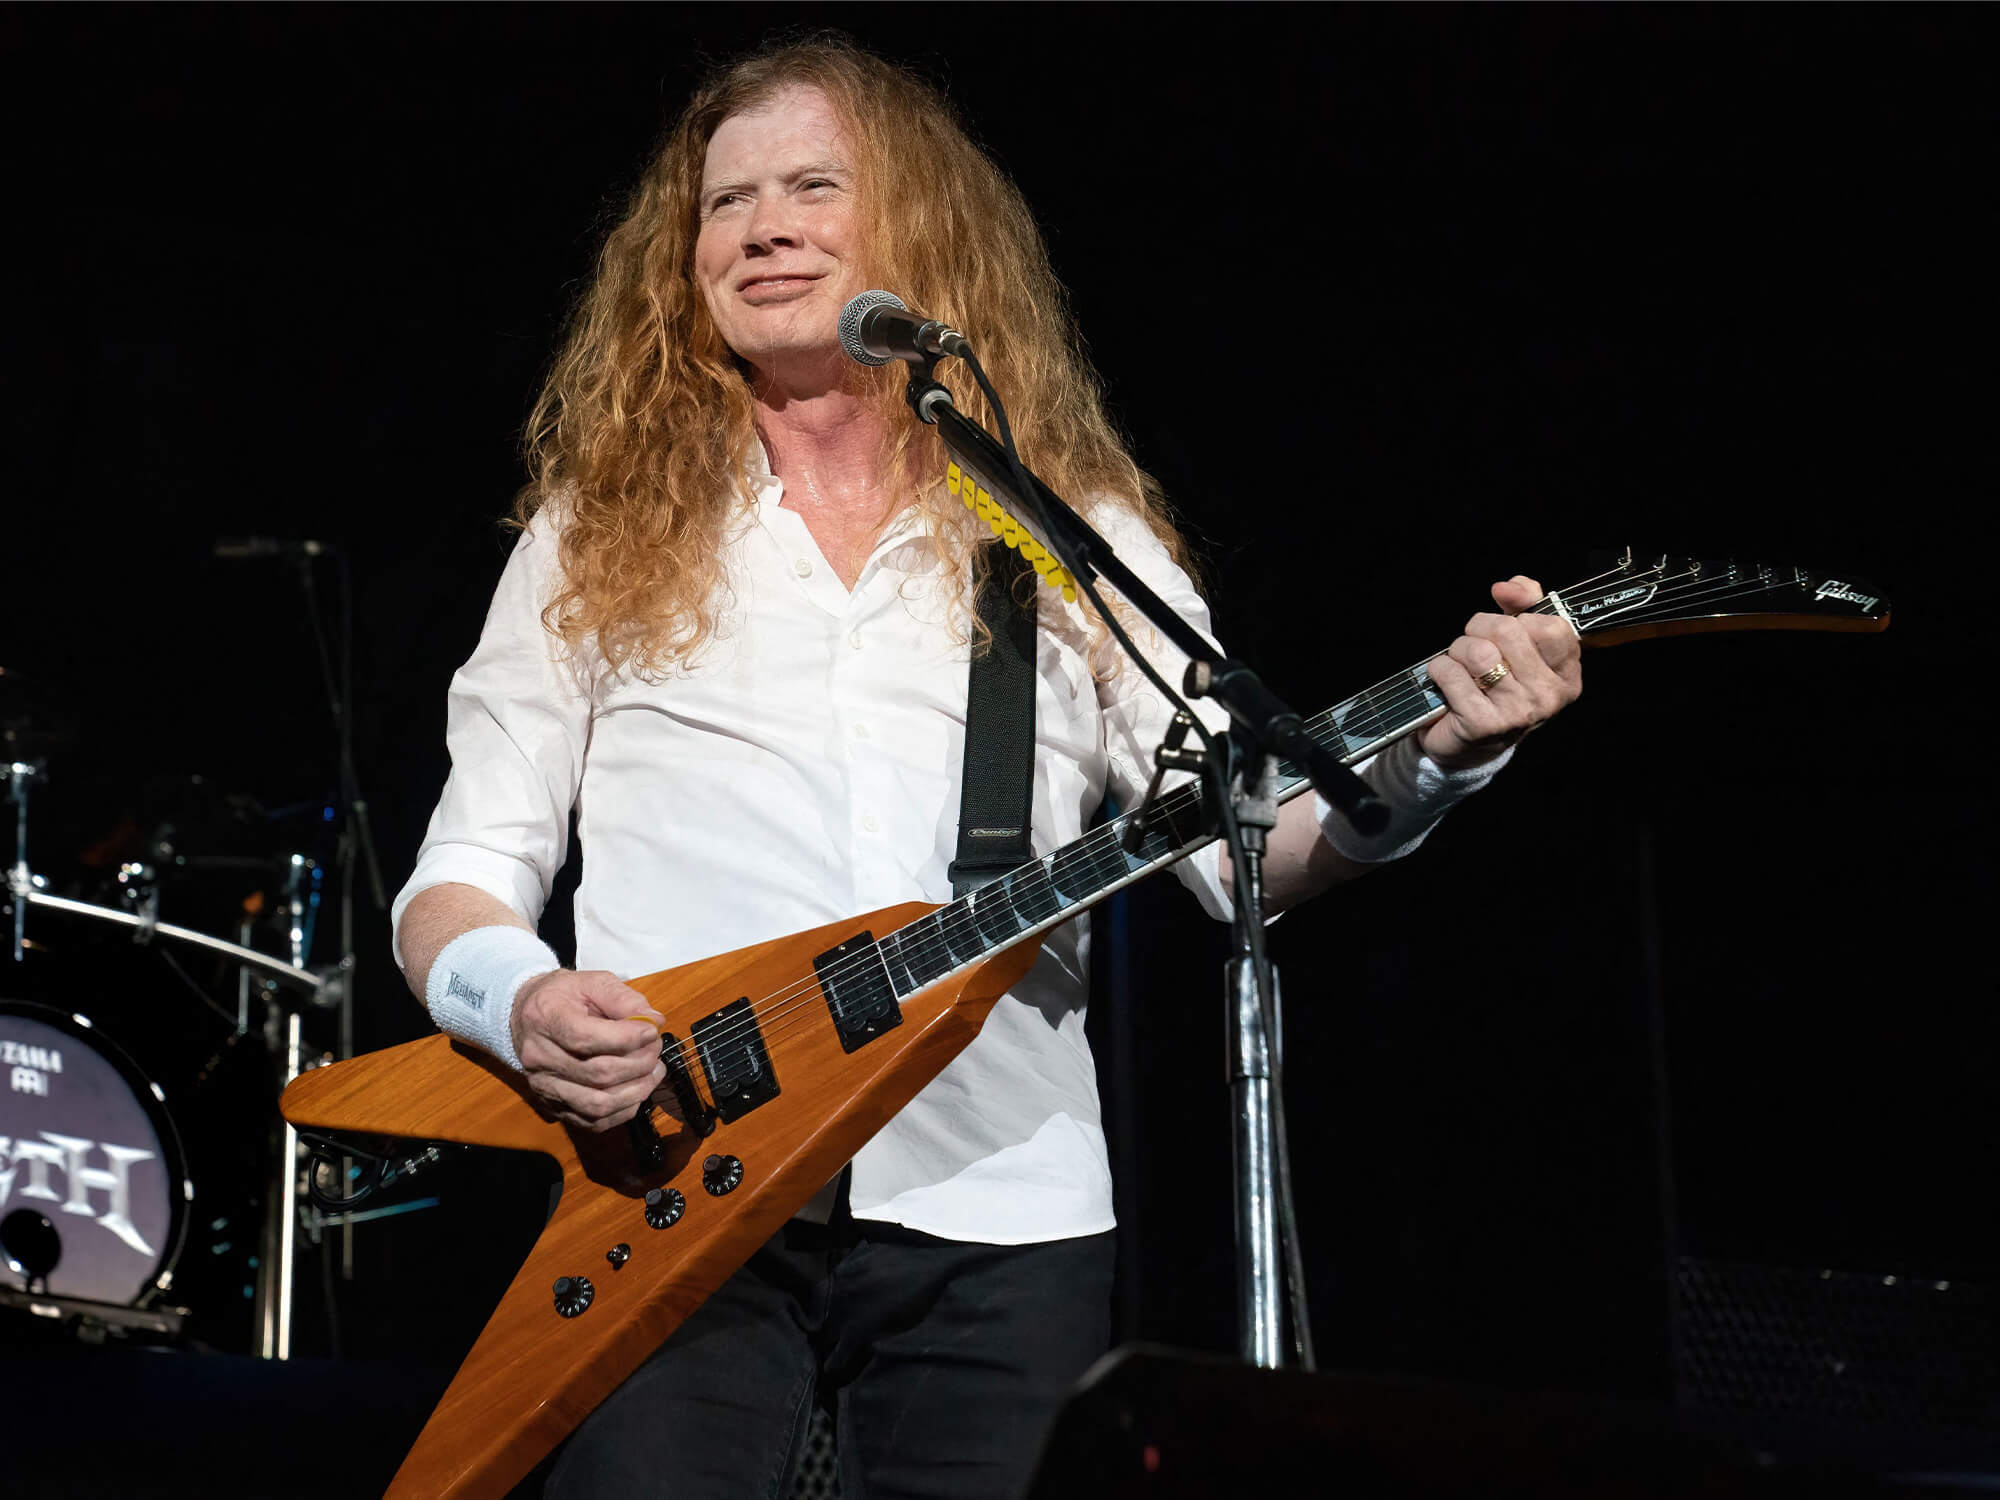 Dave Mustaine on stage. He's wearing a white shirt, is smiling, and playing a Gibson V guitar